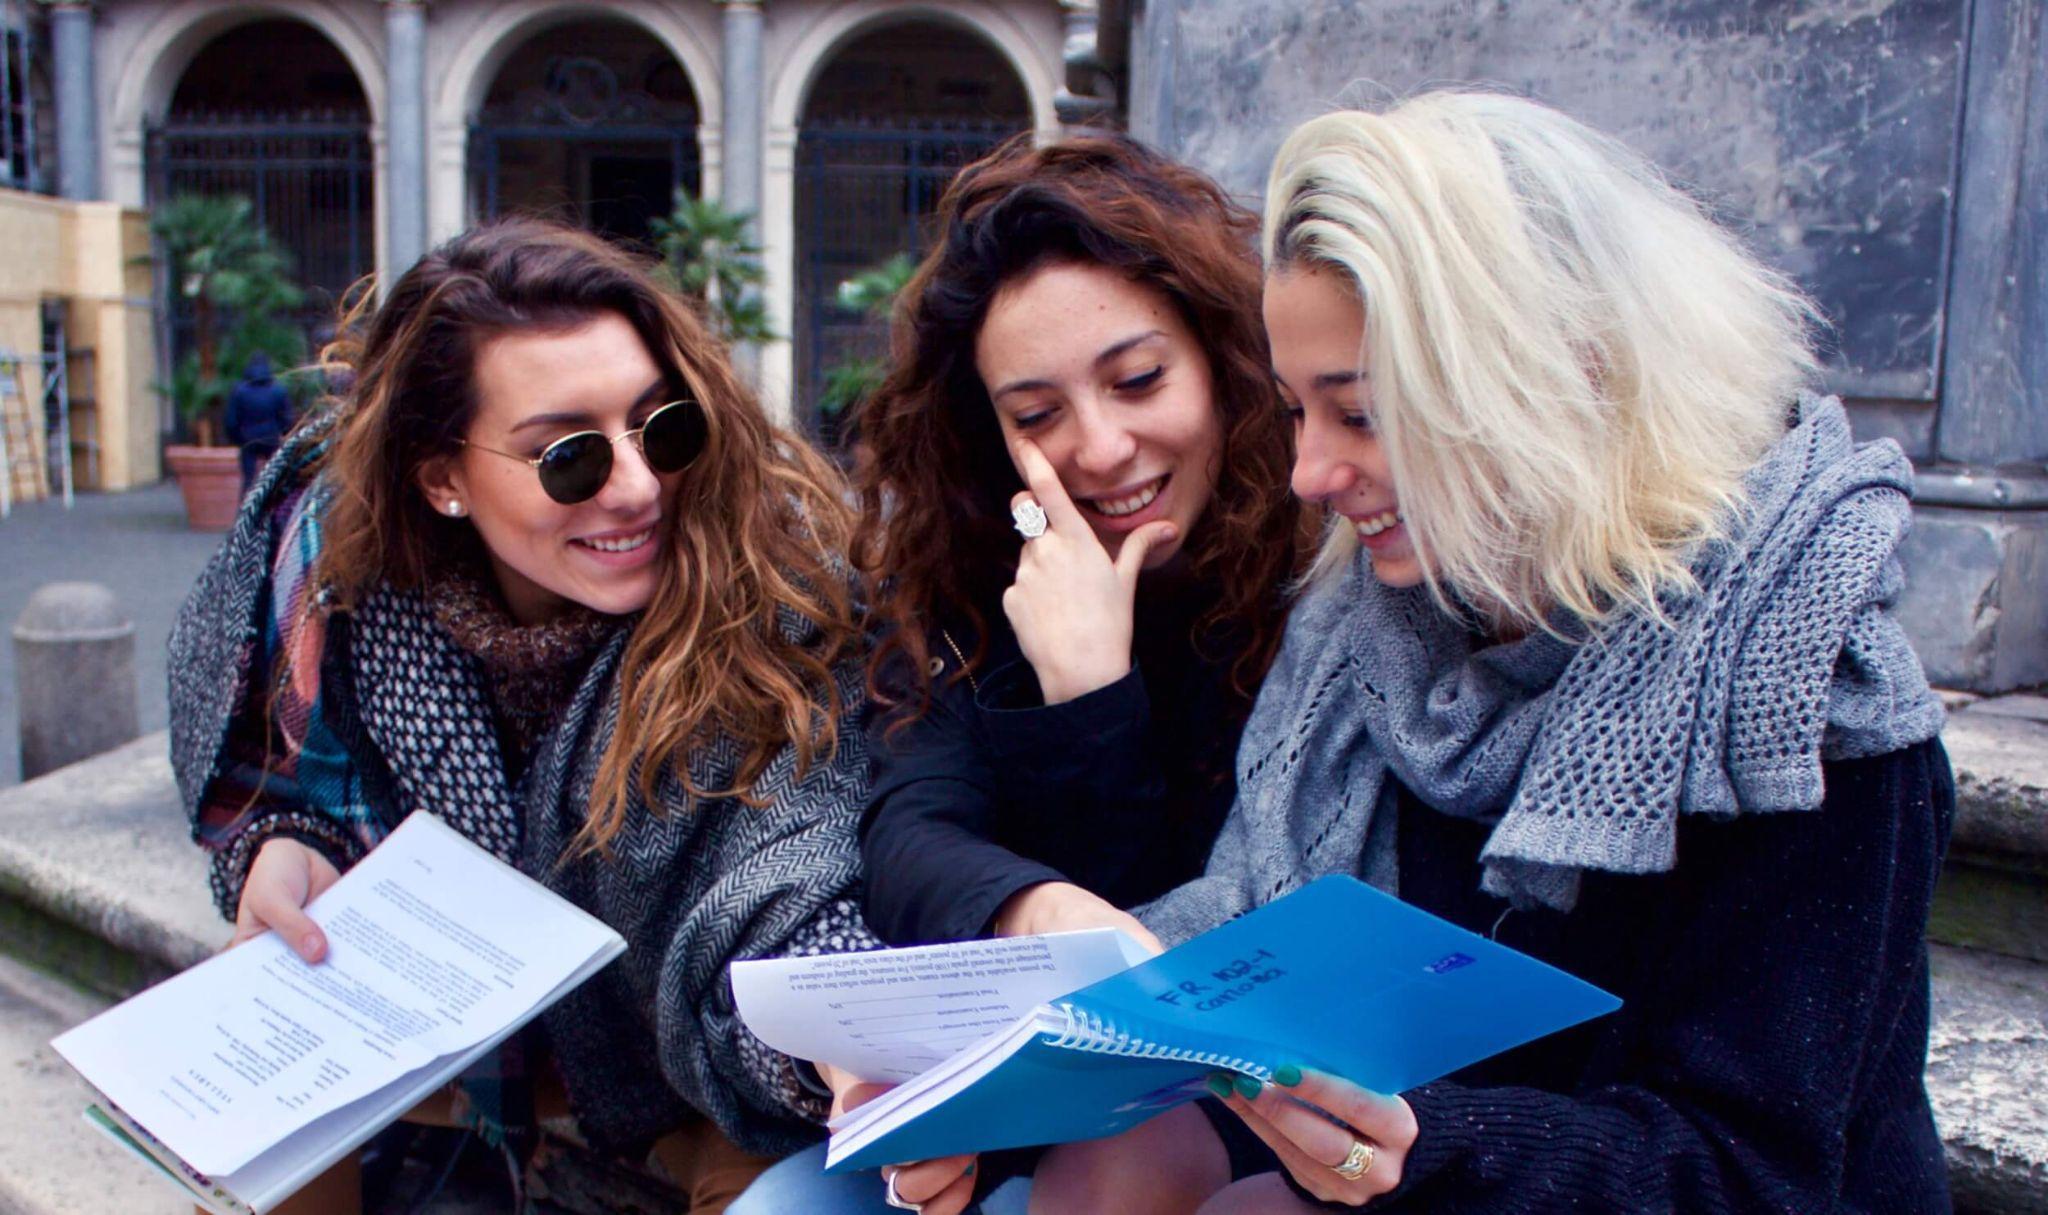 Three John Cabot University students engaged in a collaborative study session outdoors, focusing on their Certificate in Sustainability coursework